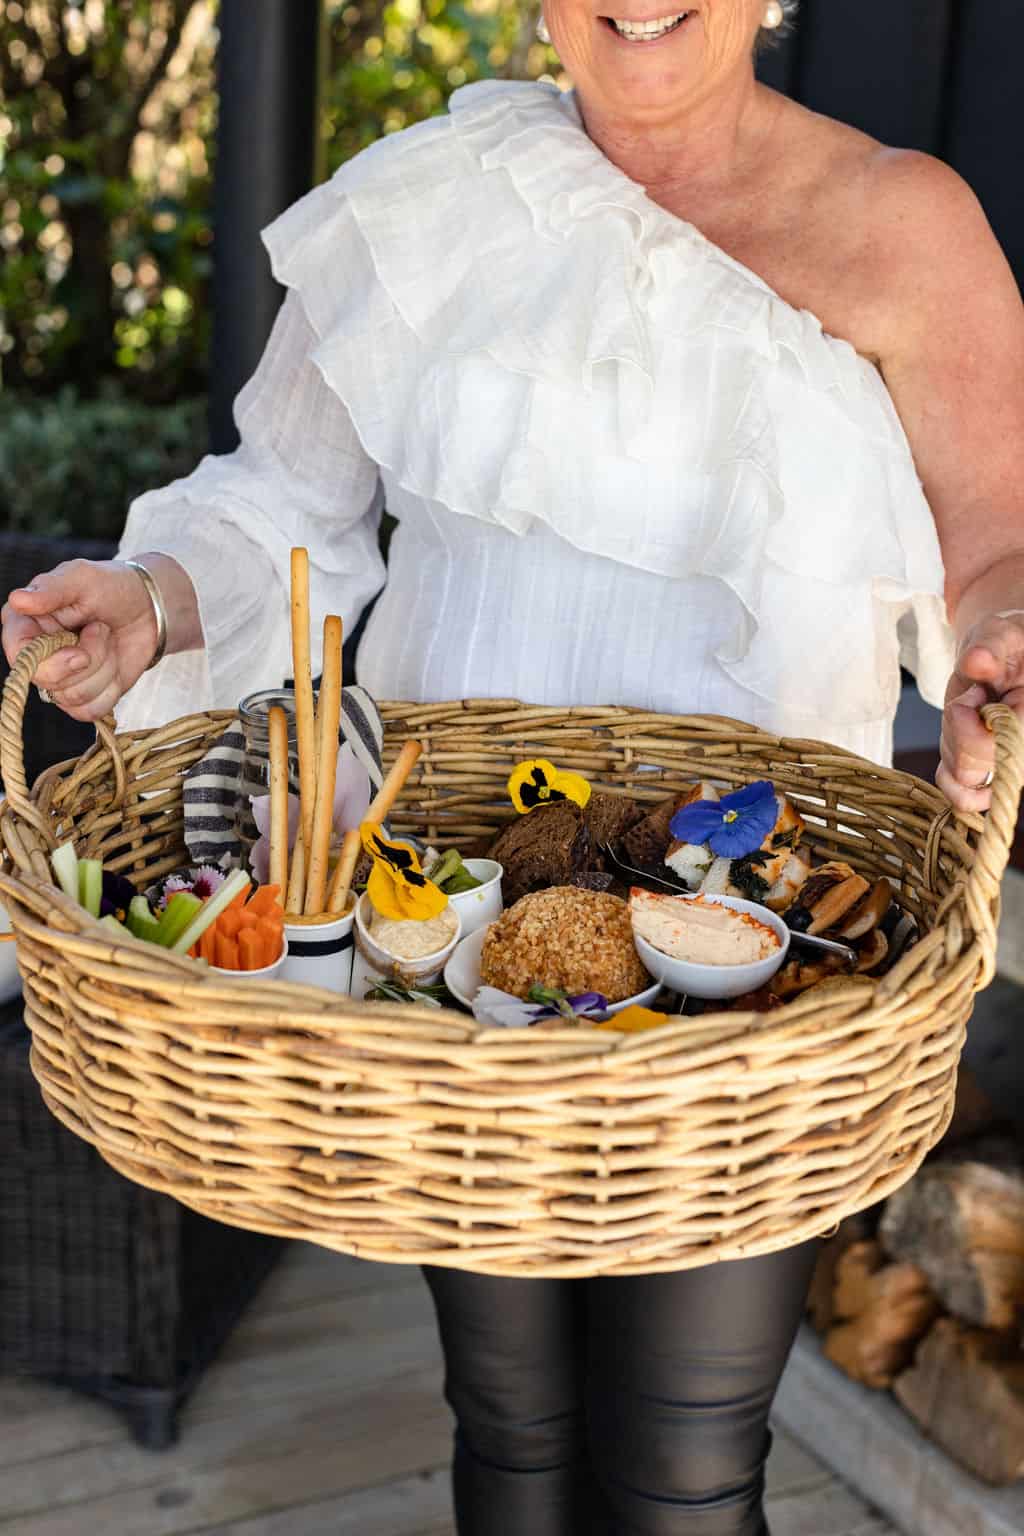 A woman holding a wicker basket full of food.